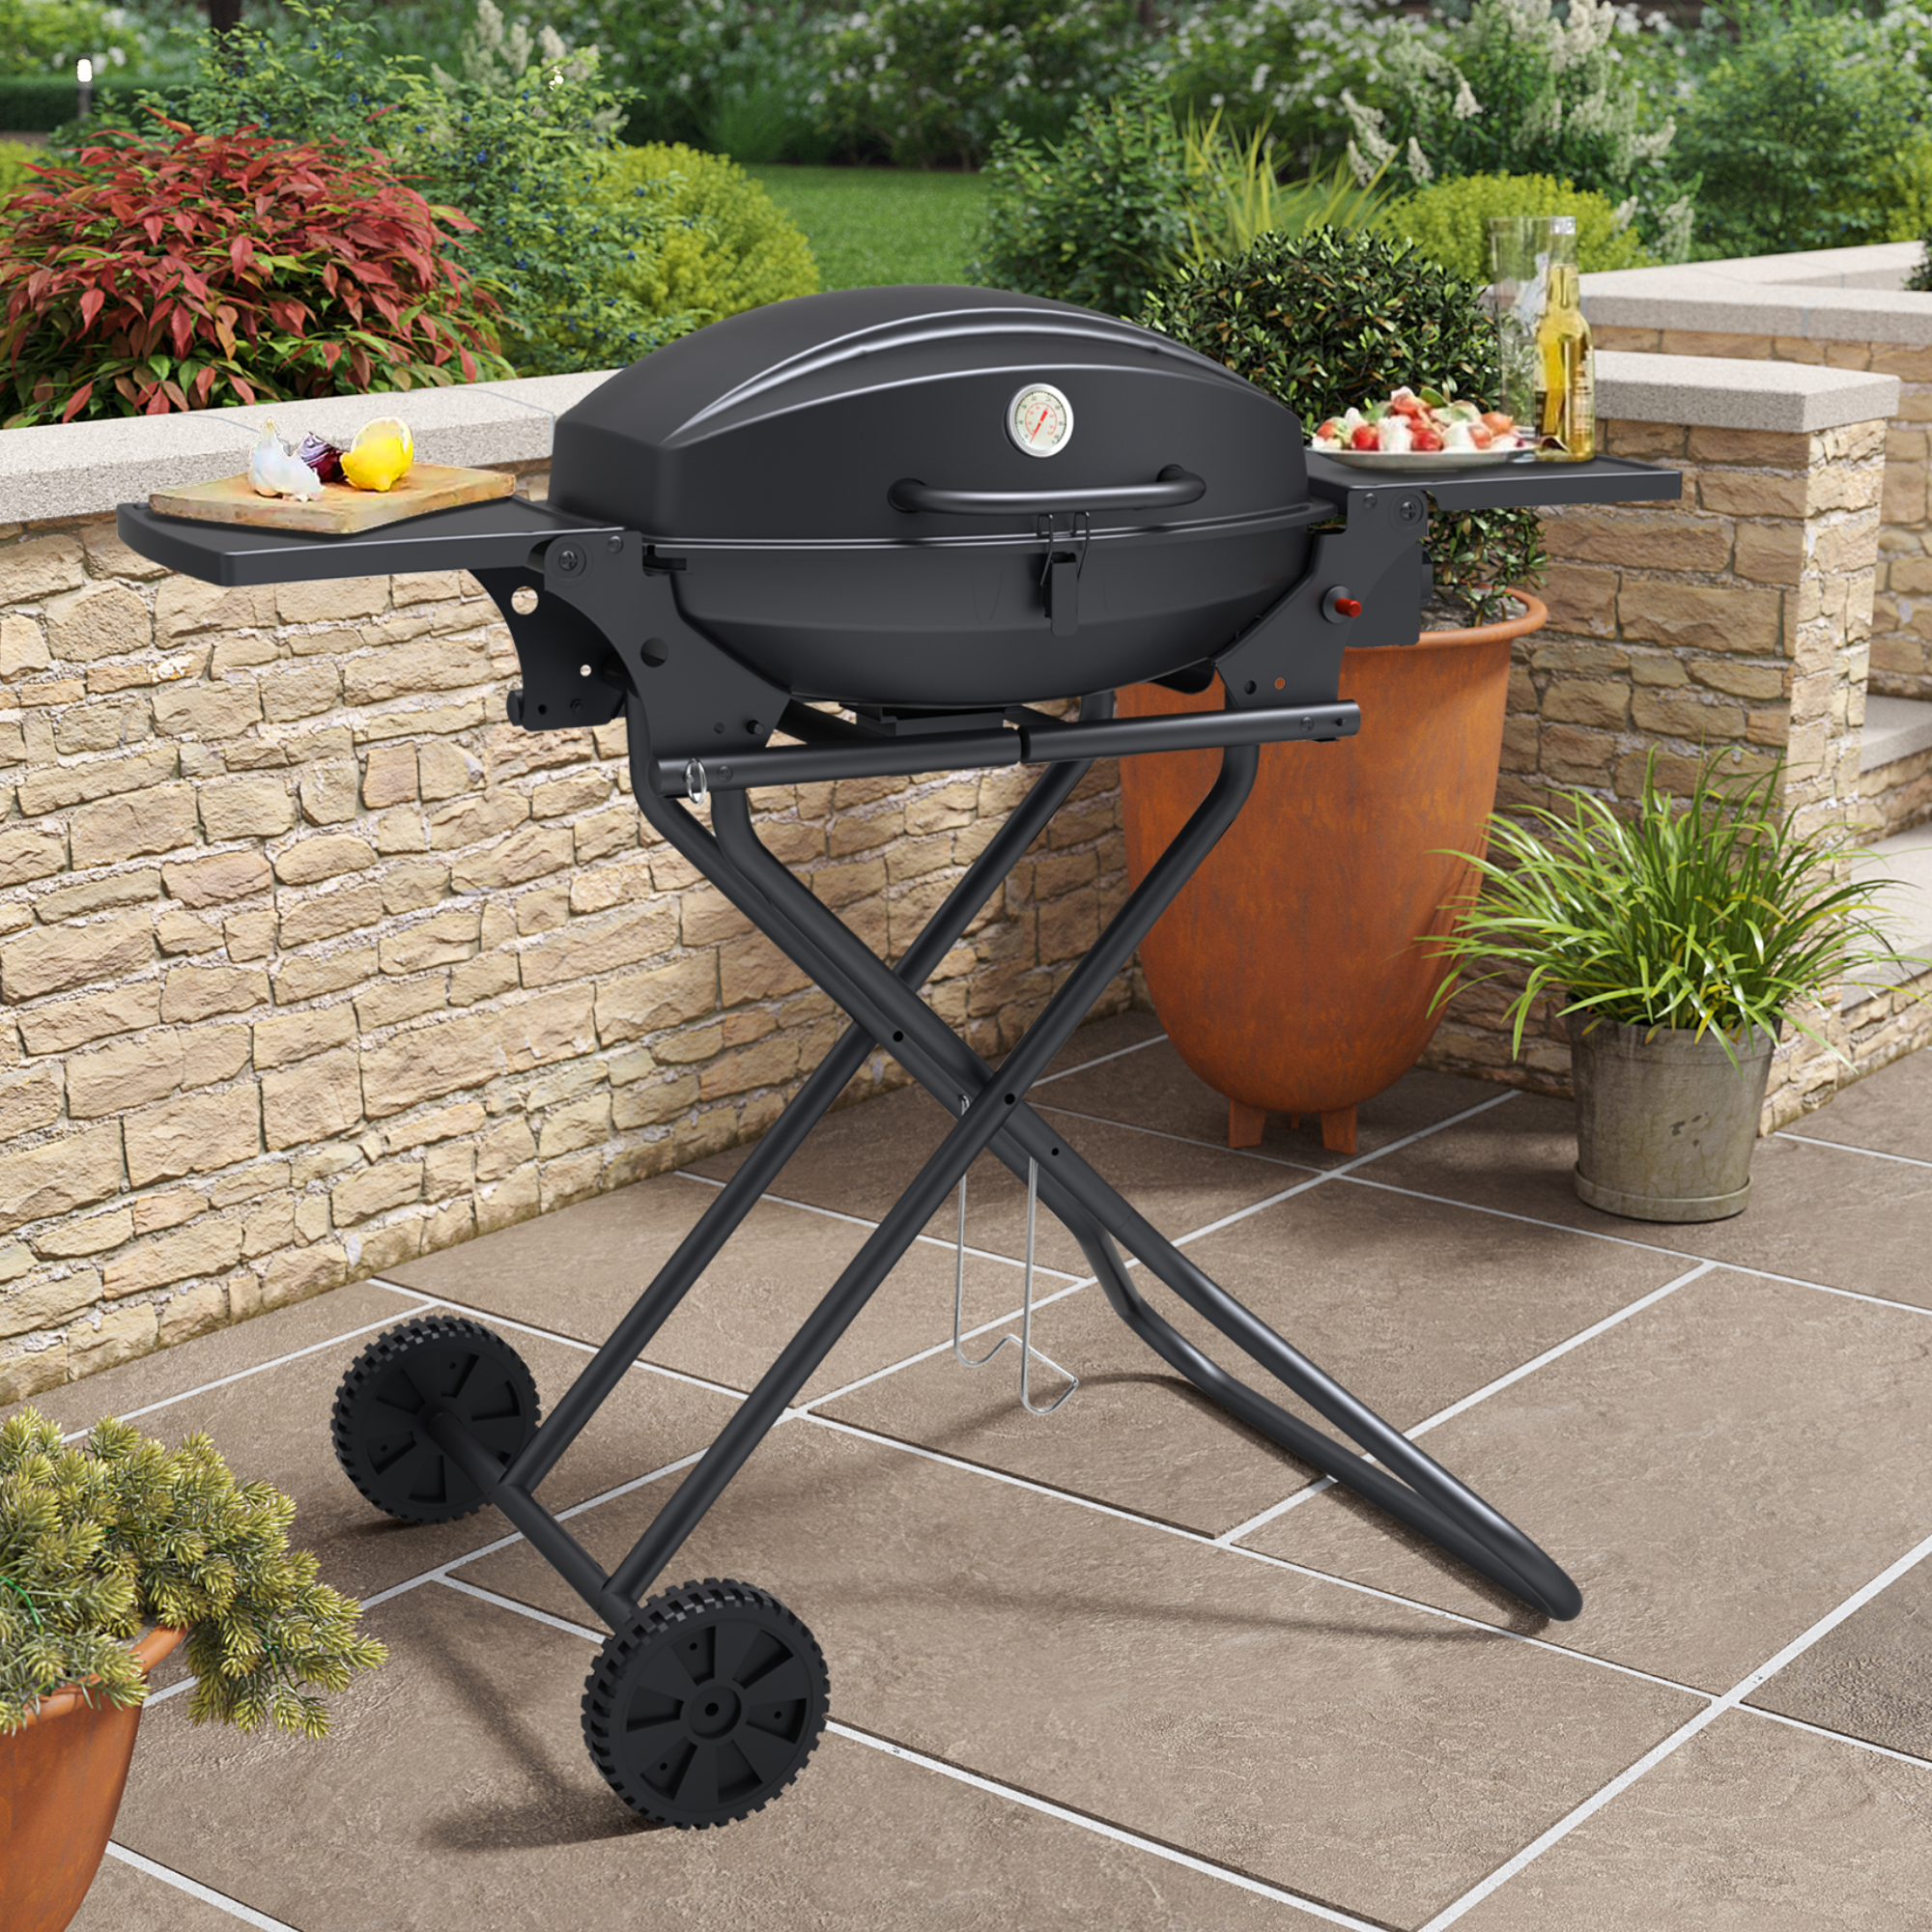 BillyOh Tennessee Black Portable Gas BBQ with Trolley Includes Cover & Regulator - BBQ with Trolley - Black